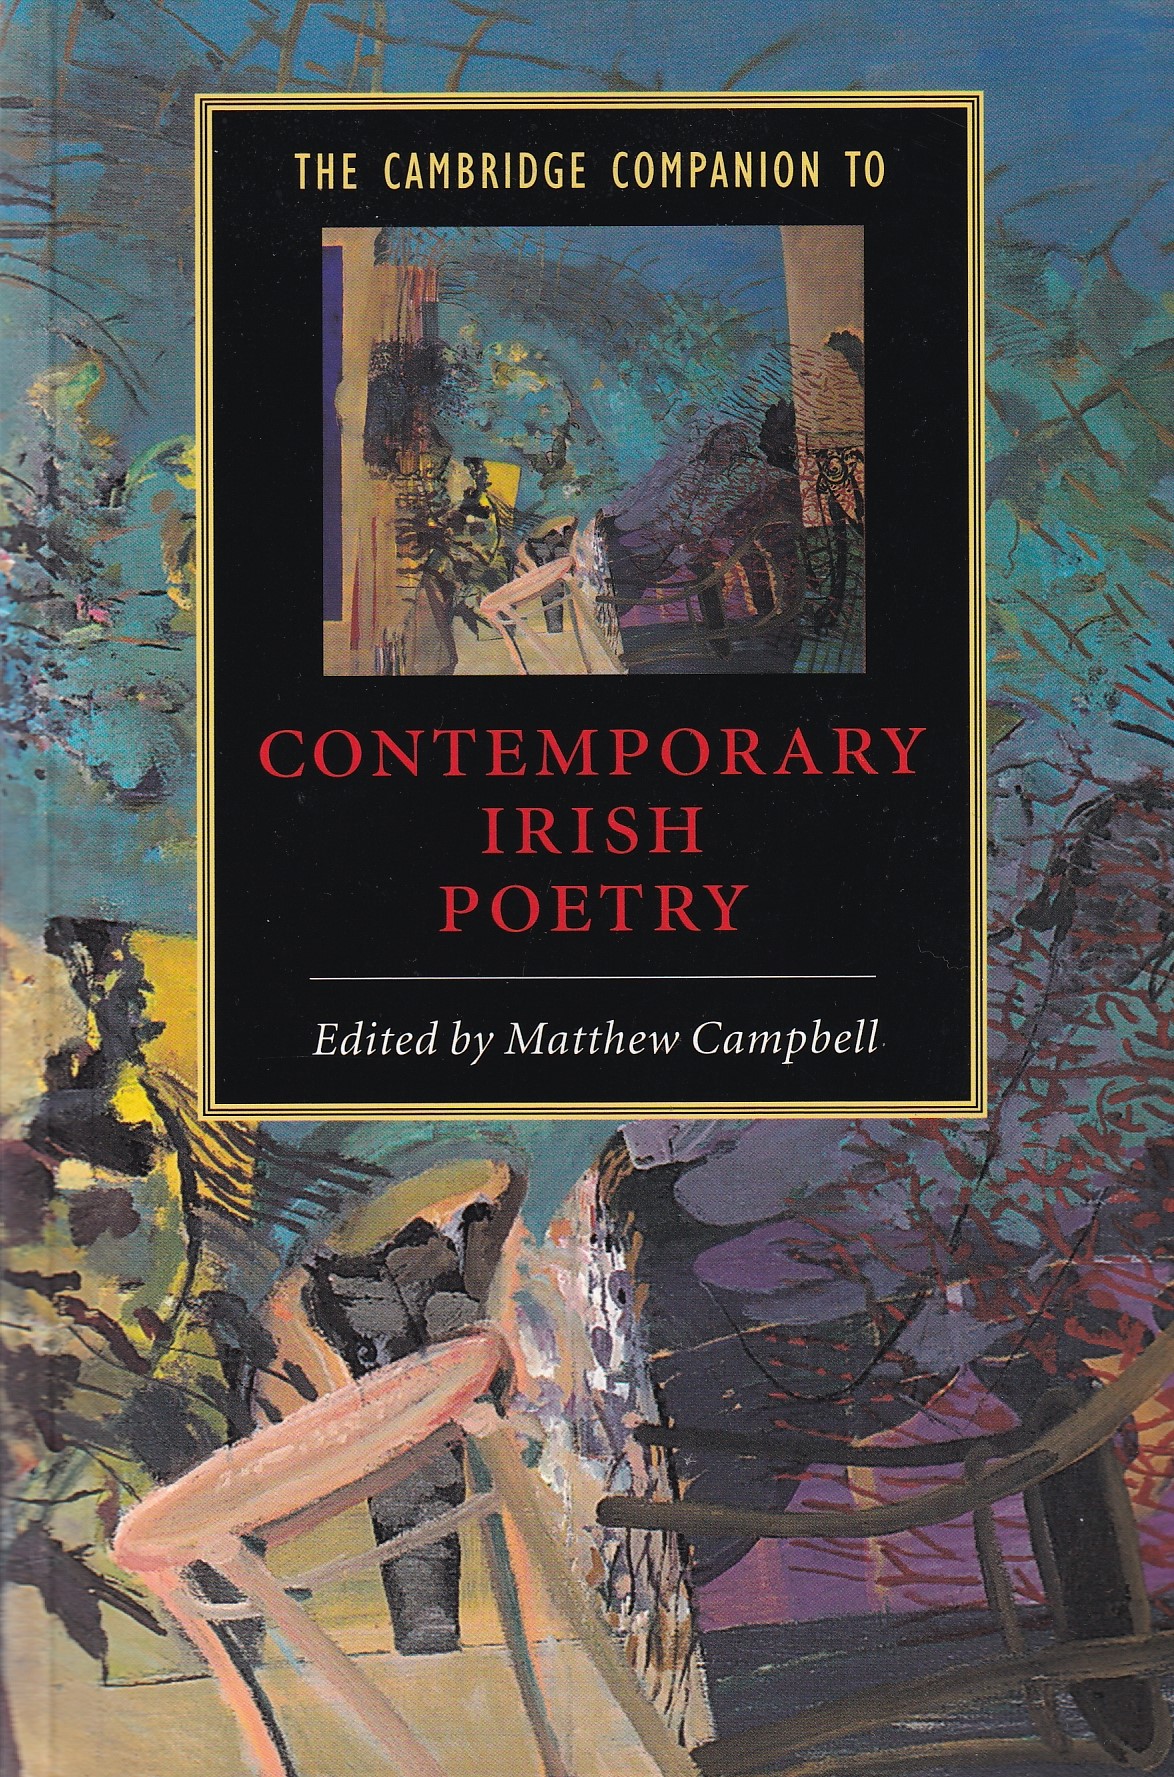 The Cambridge Companion to Contemporary Irish Poetry by Matthew Campbell (ed.)